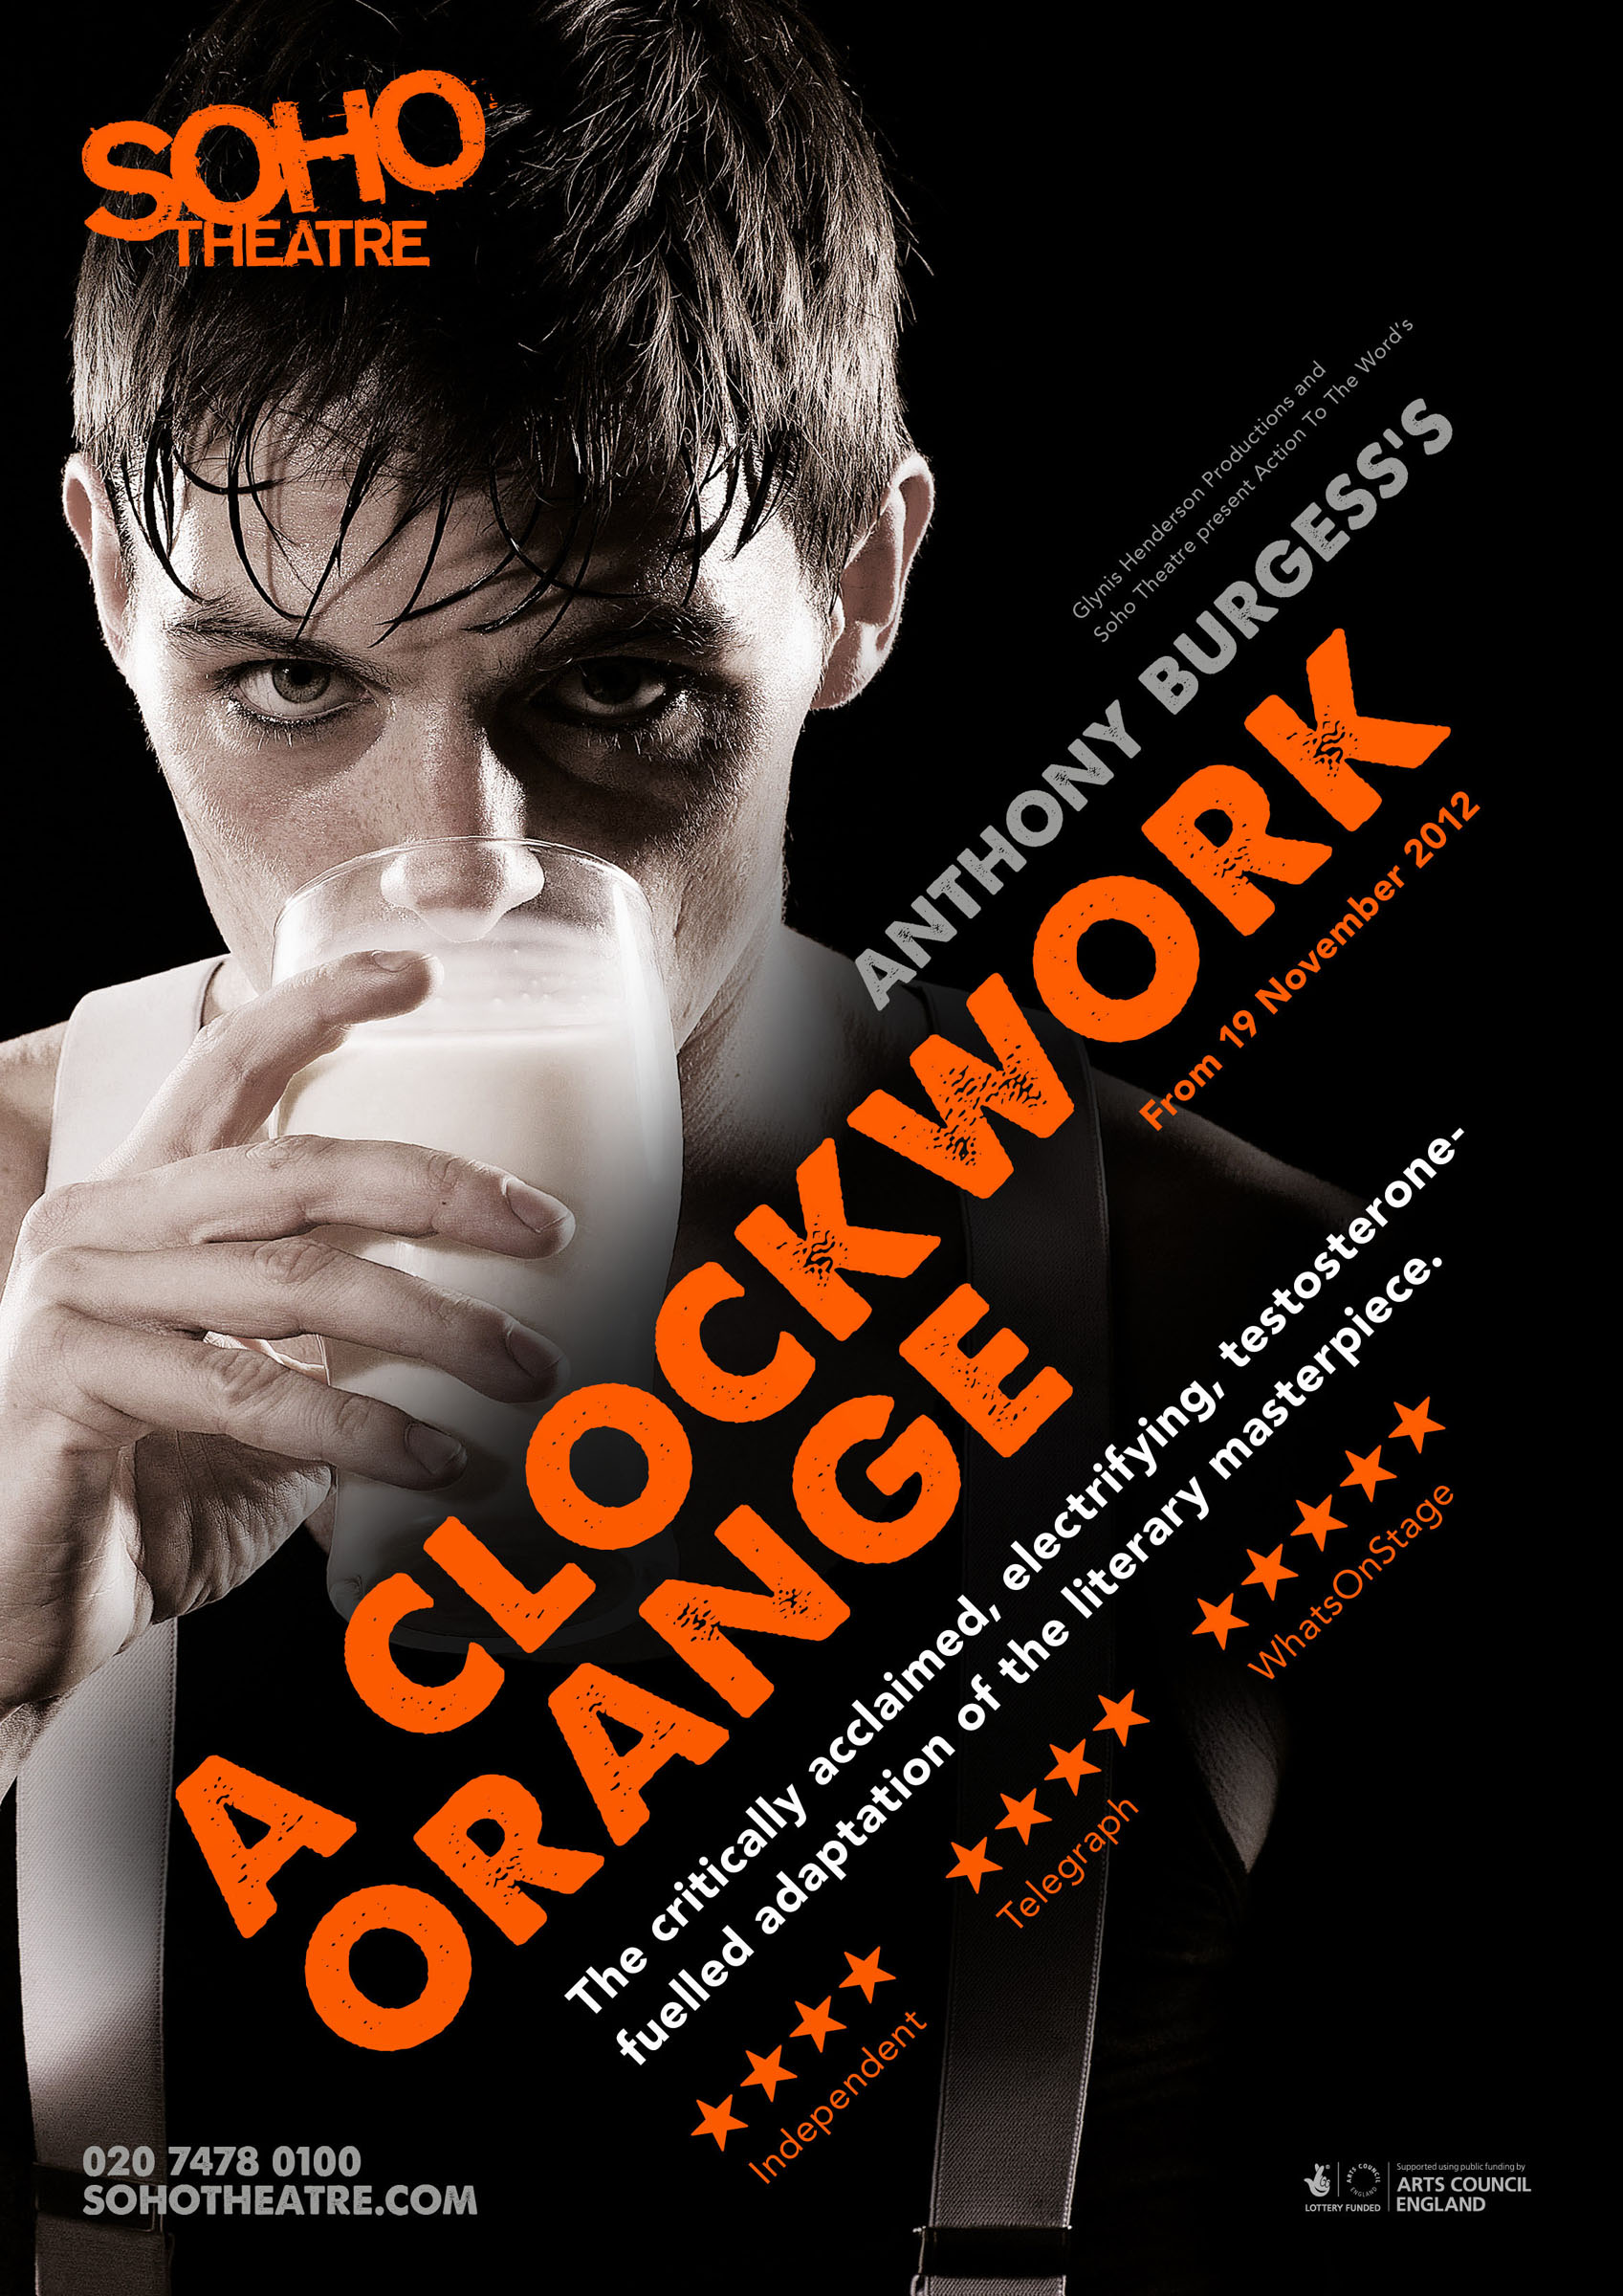 Promotional poster for A Clockwork Orange at the Soho Theatre